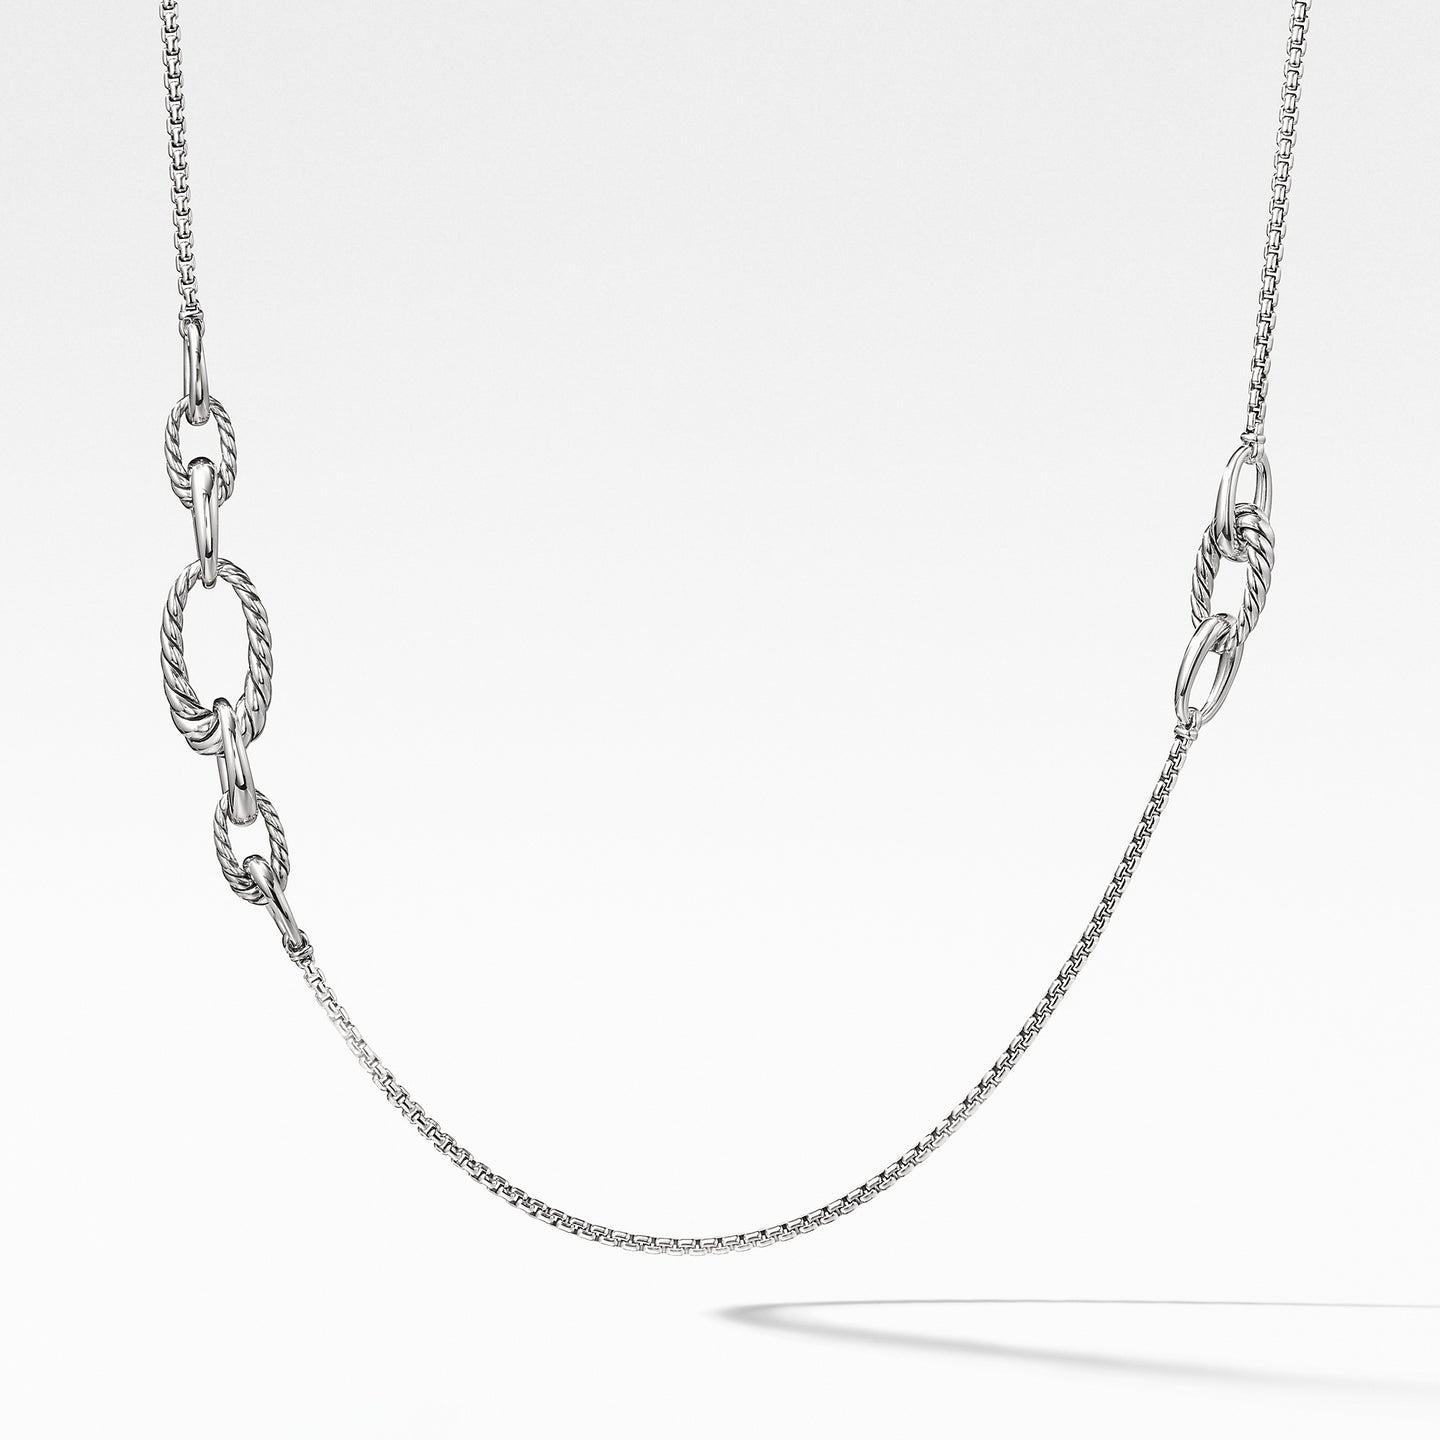 Pure Form® Chain Station Necklace, 36